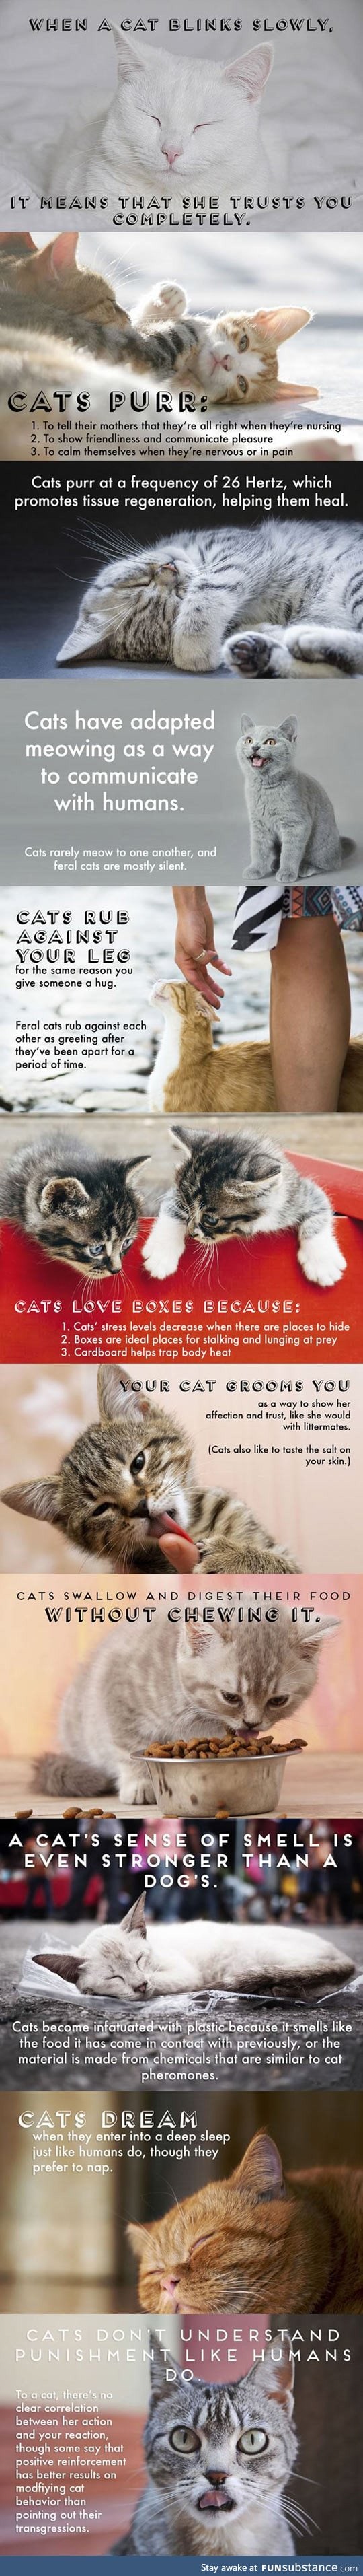 Things You Probably Didn't Know About Cats